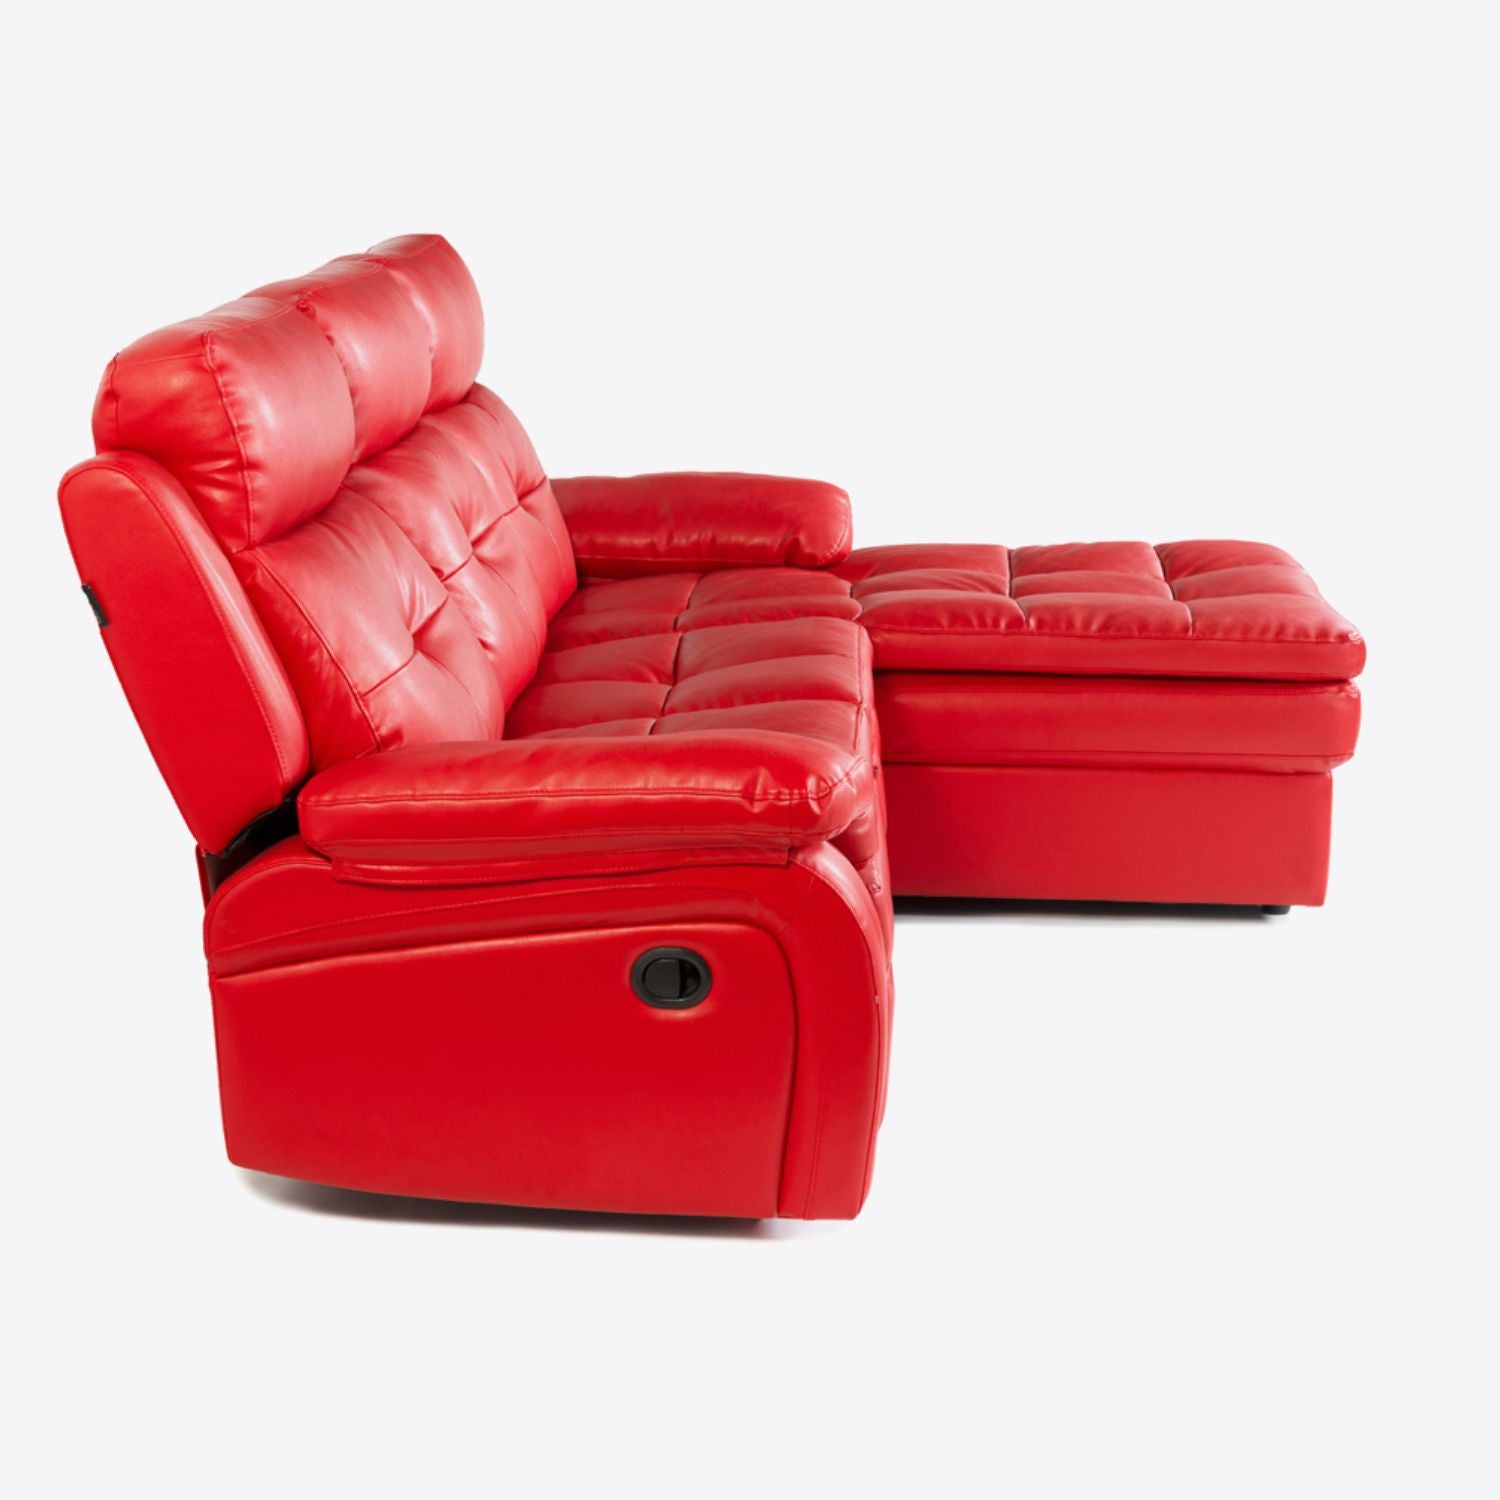 299IC – RECLINER WITH LOUNGER Recliners India